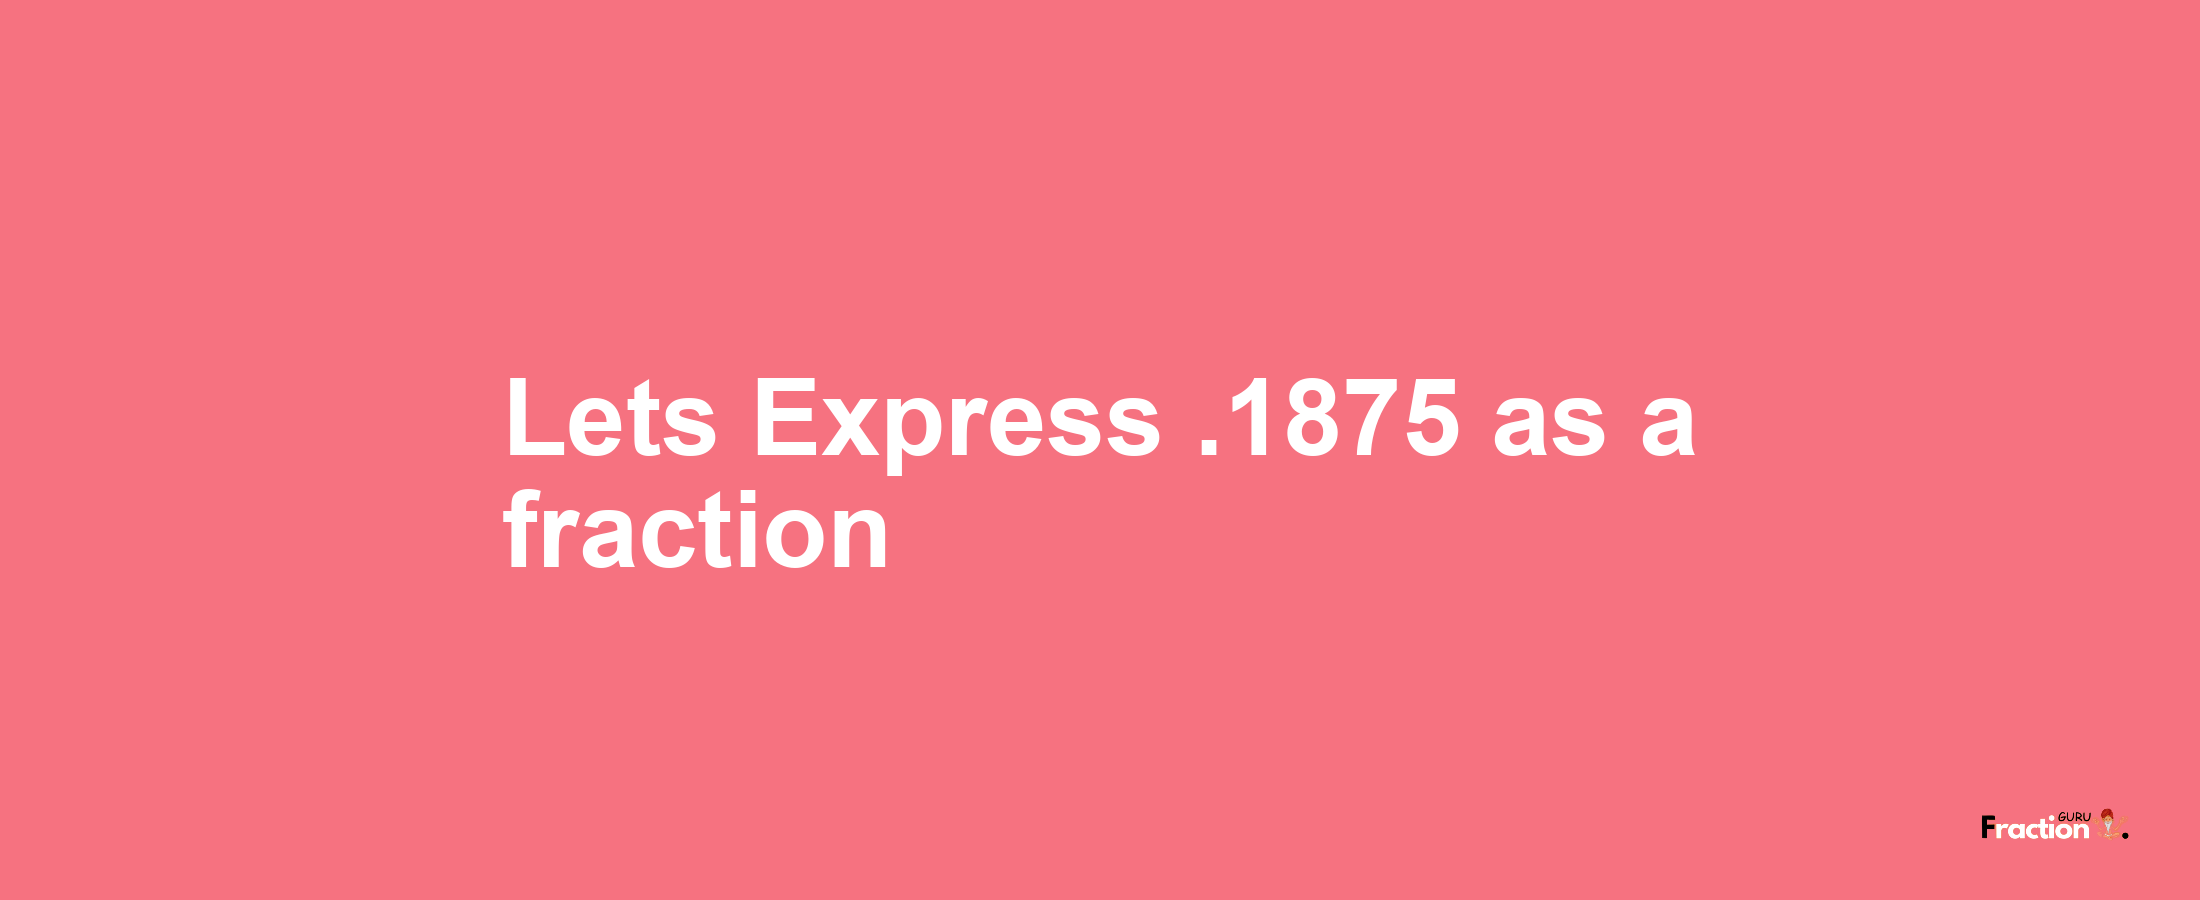 Lets Express .1875 as afraction